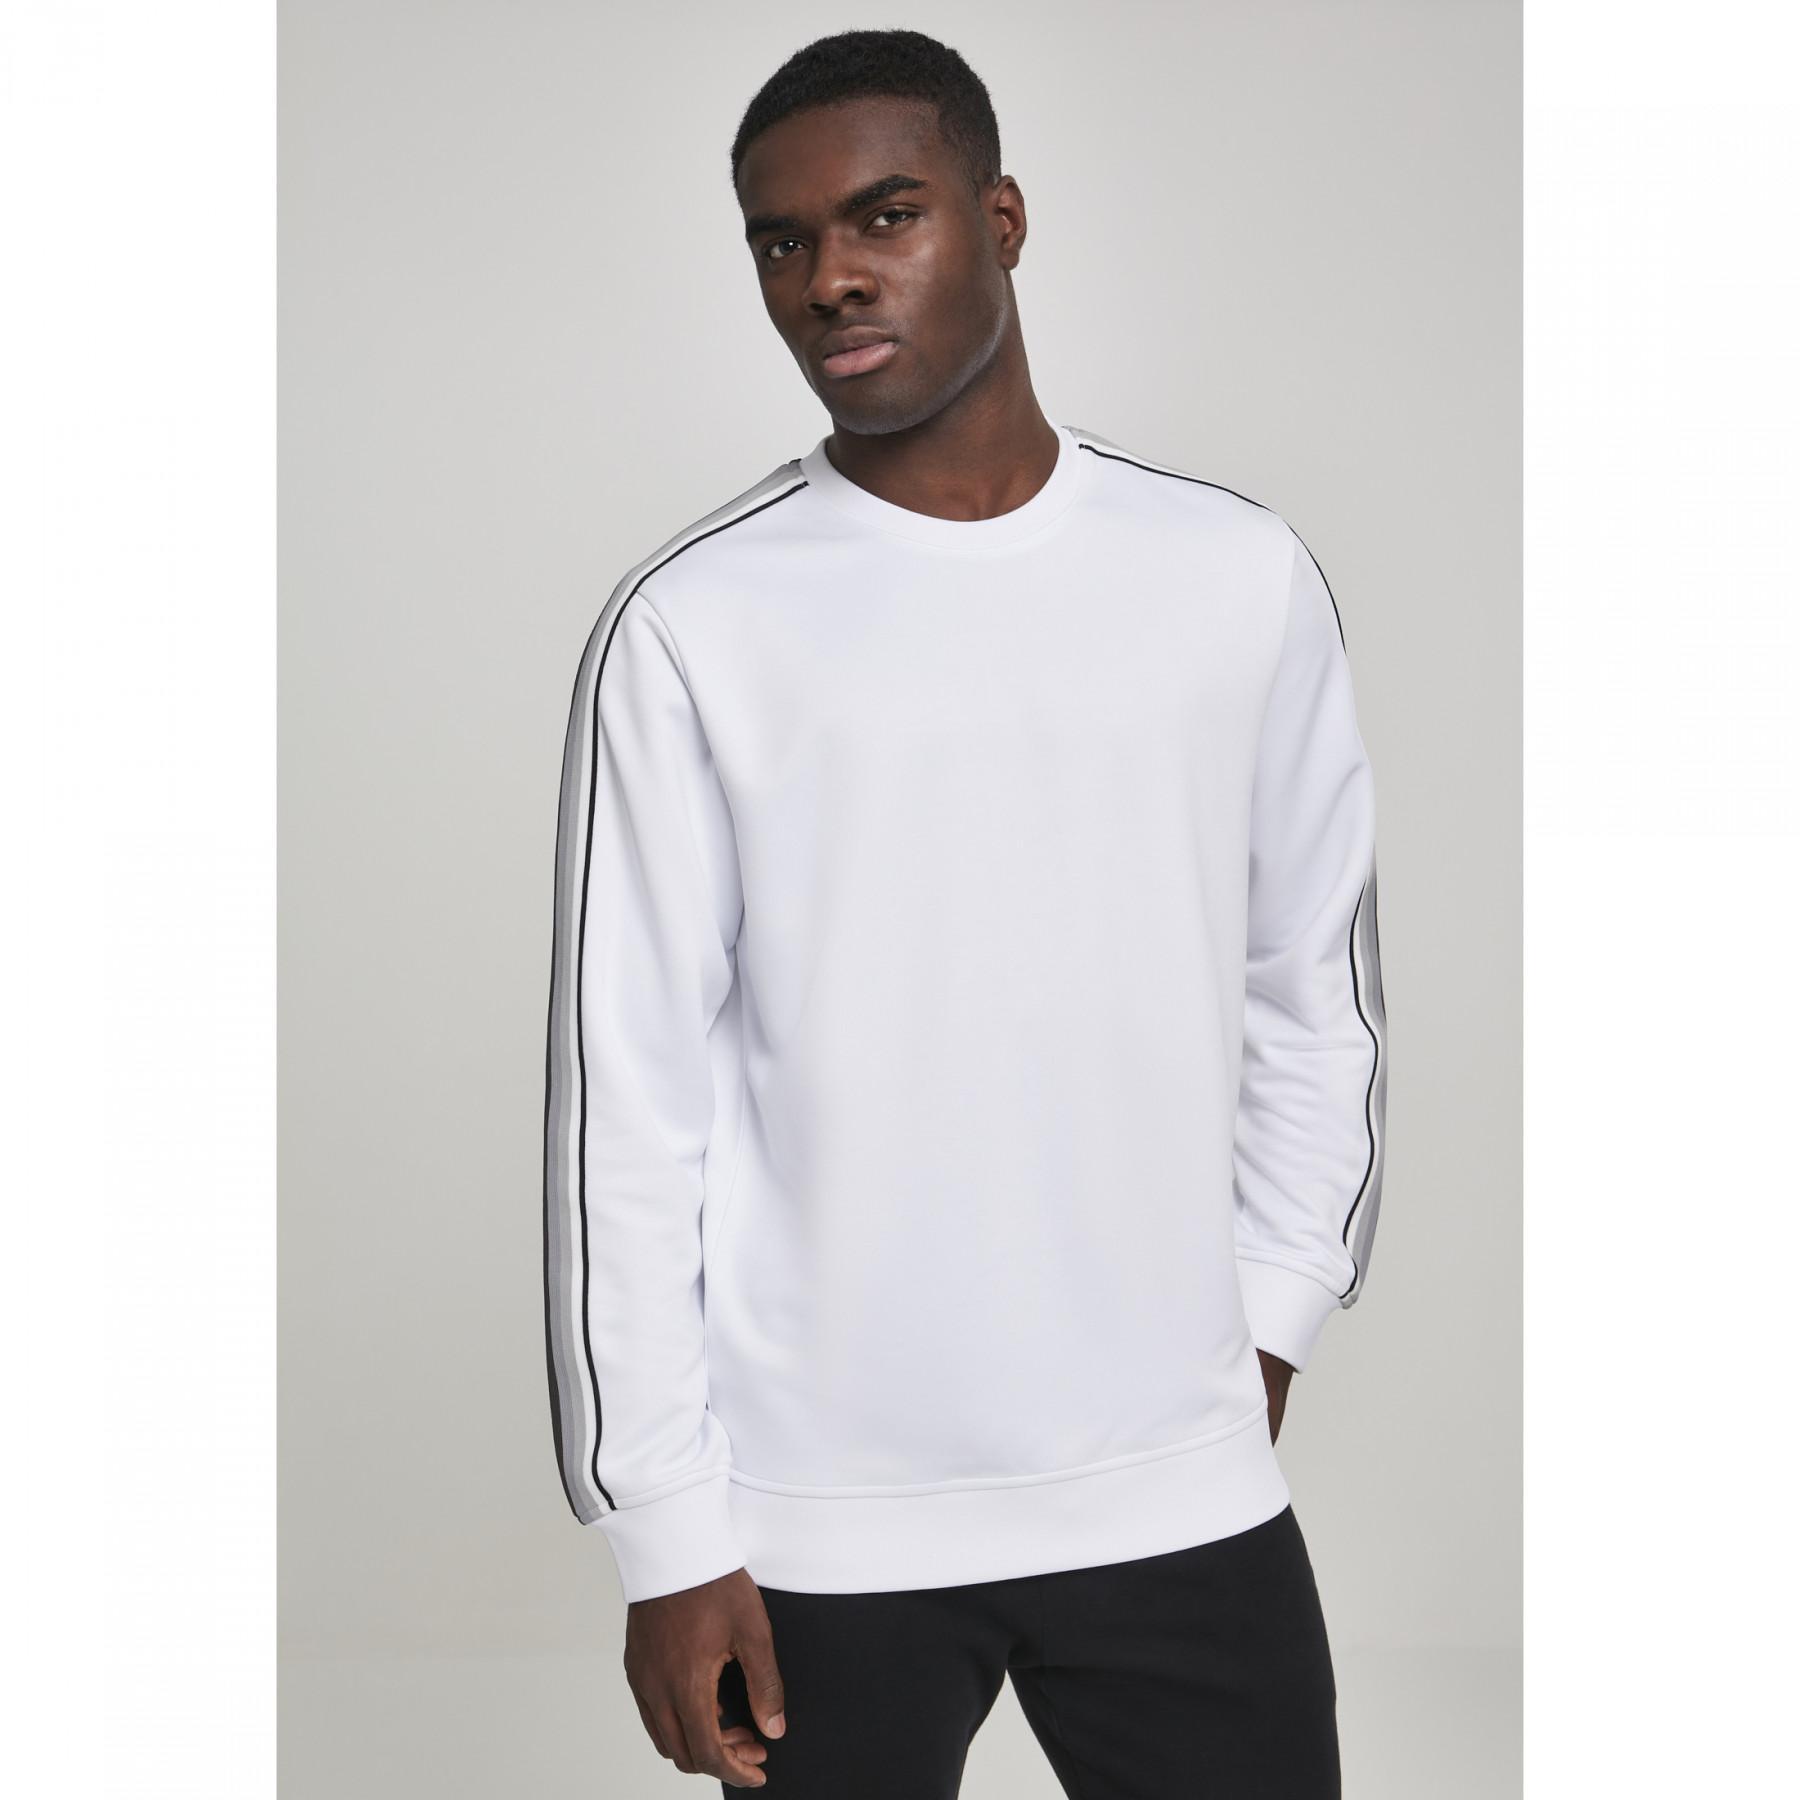 T-shirt grandes tailles Urban Classic leeve taped